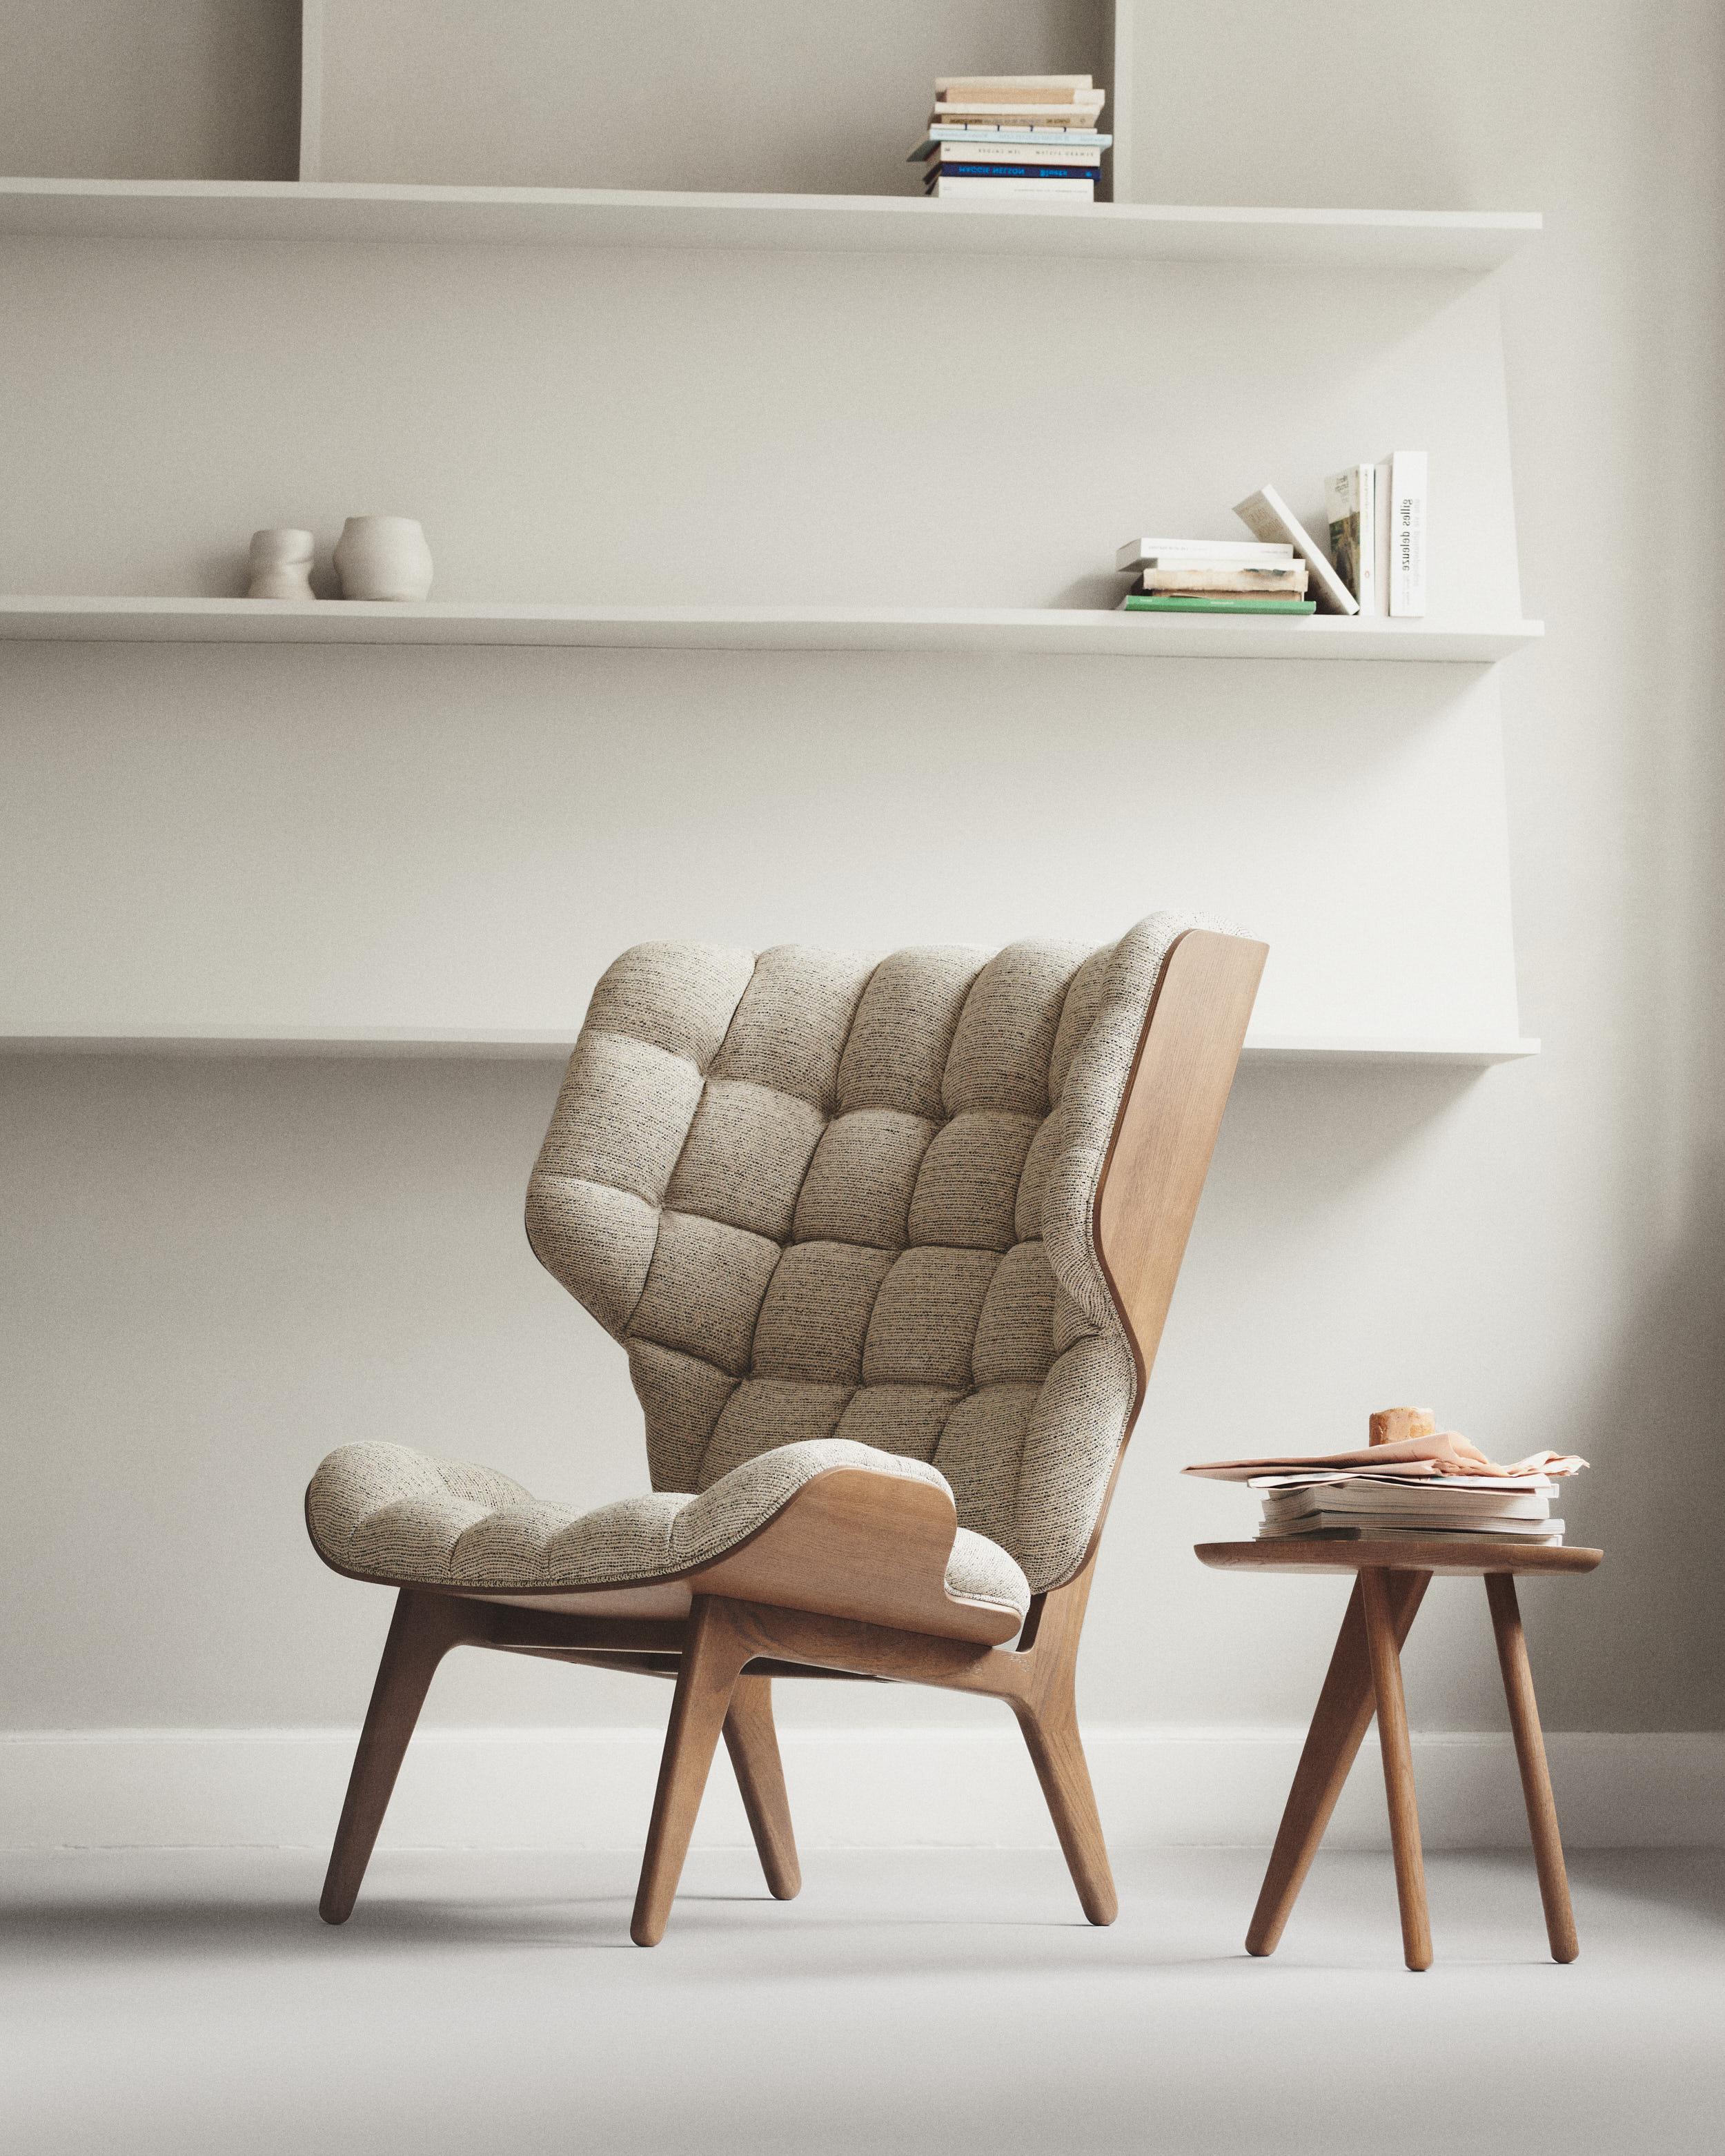 Mammoth chair + ottoman
Signed by Rune Krøjgaard & Knut Bendik Humlevik for Norr11. 

Dimensions:
- Chair: W 89 cm / D 87 cm / H 104 cm / SH 35,5 cm
- Ottoman: W 61,5 cm / D 53 cm / H 37 cm

Models shown on the picture:
Wood: Black